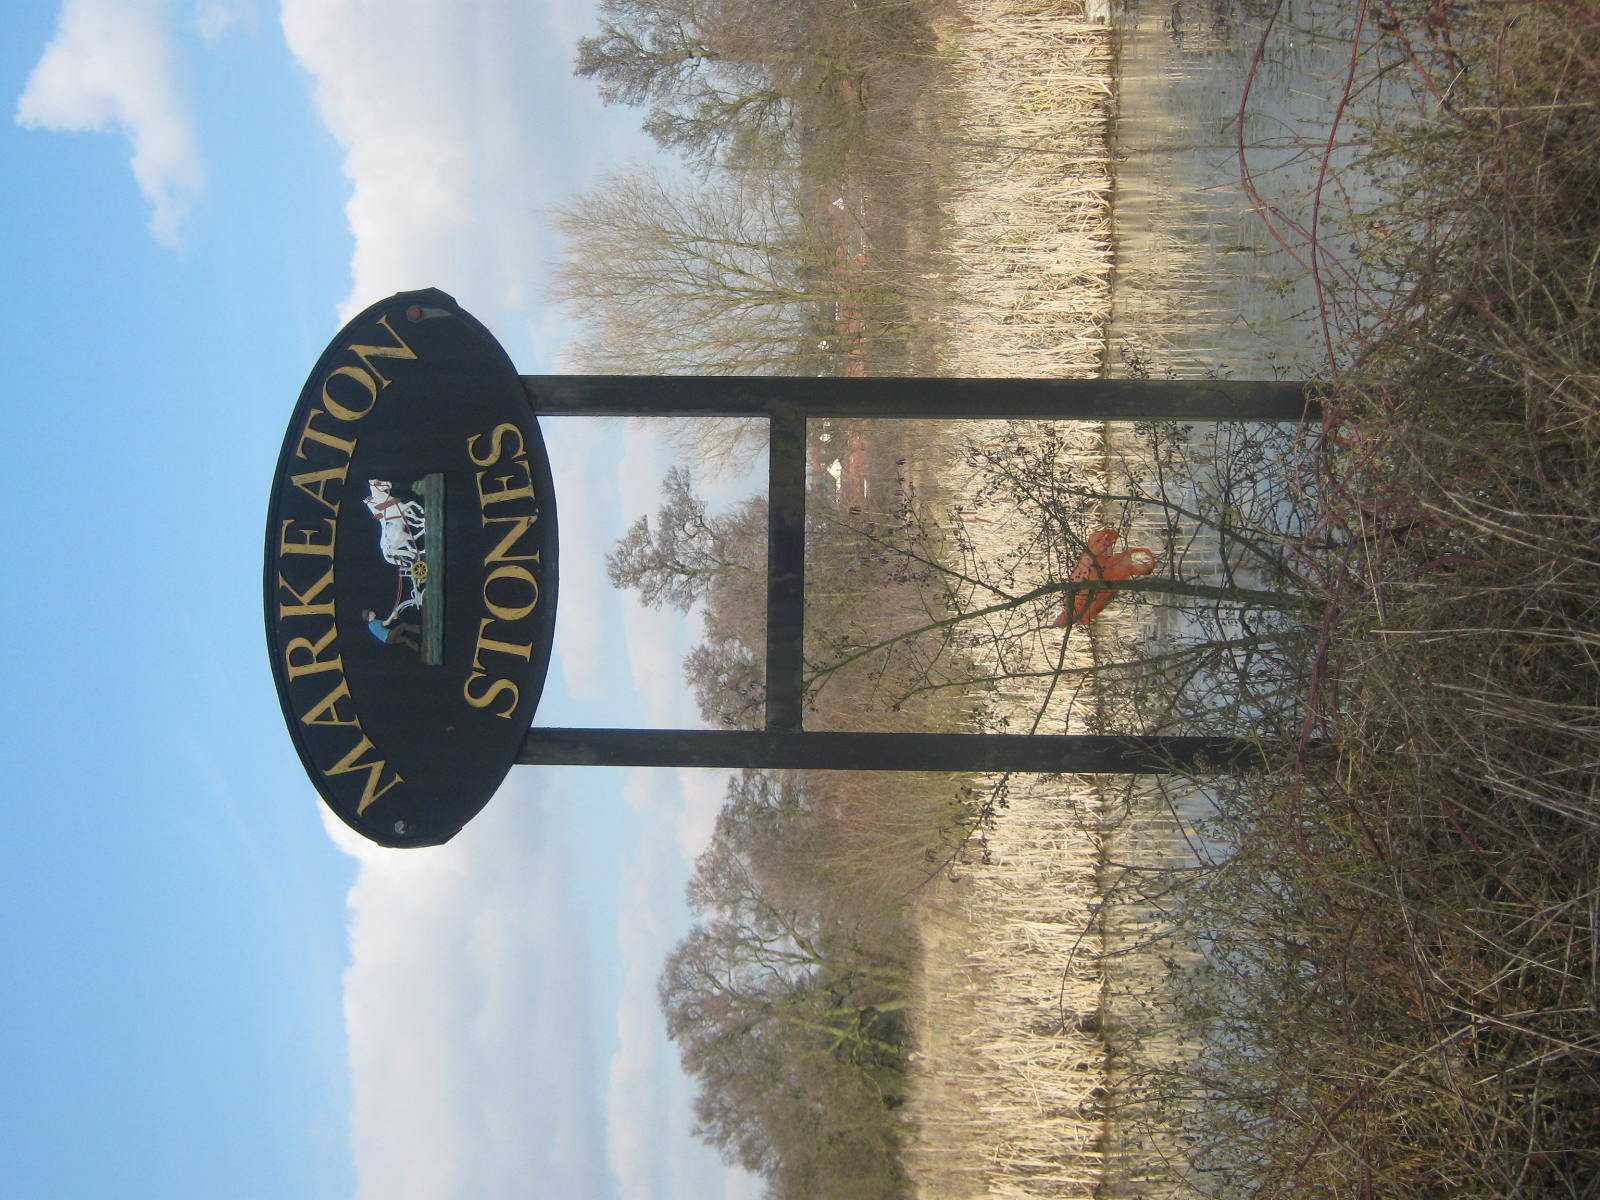 an image of a stone sign in a marsh setting